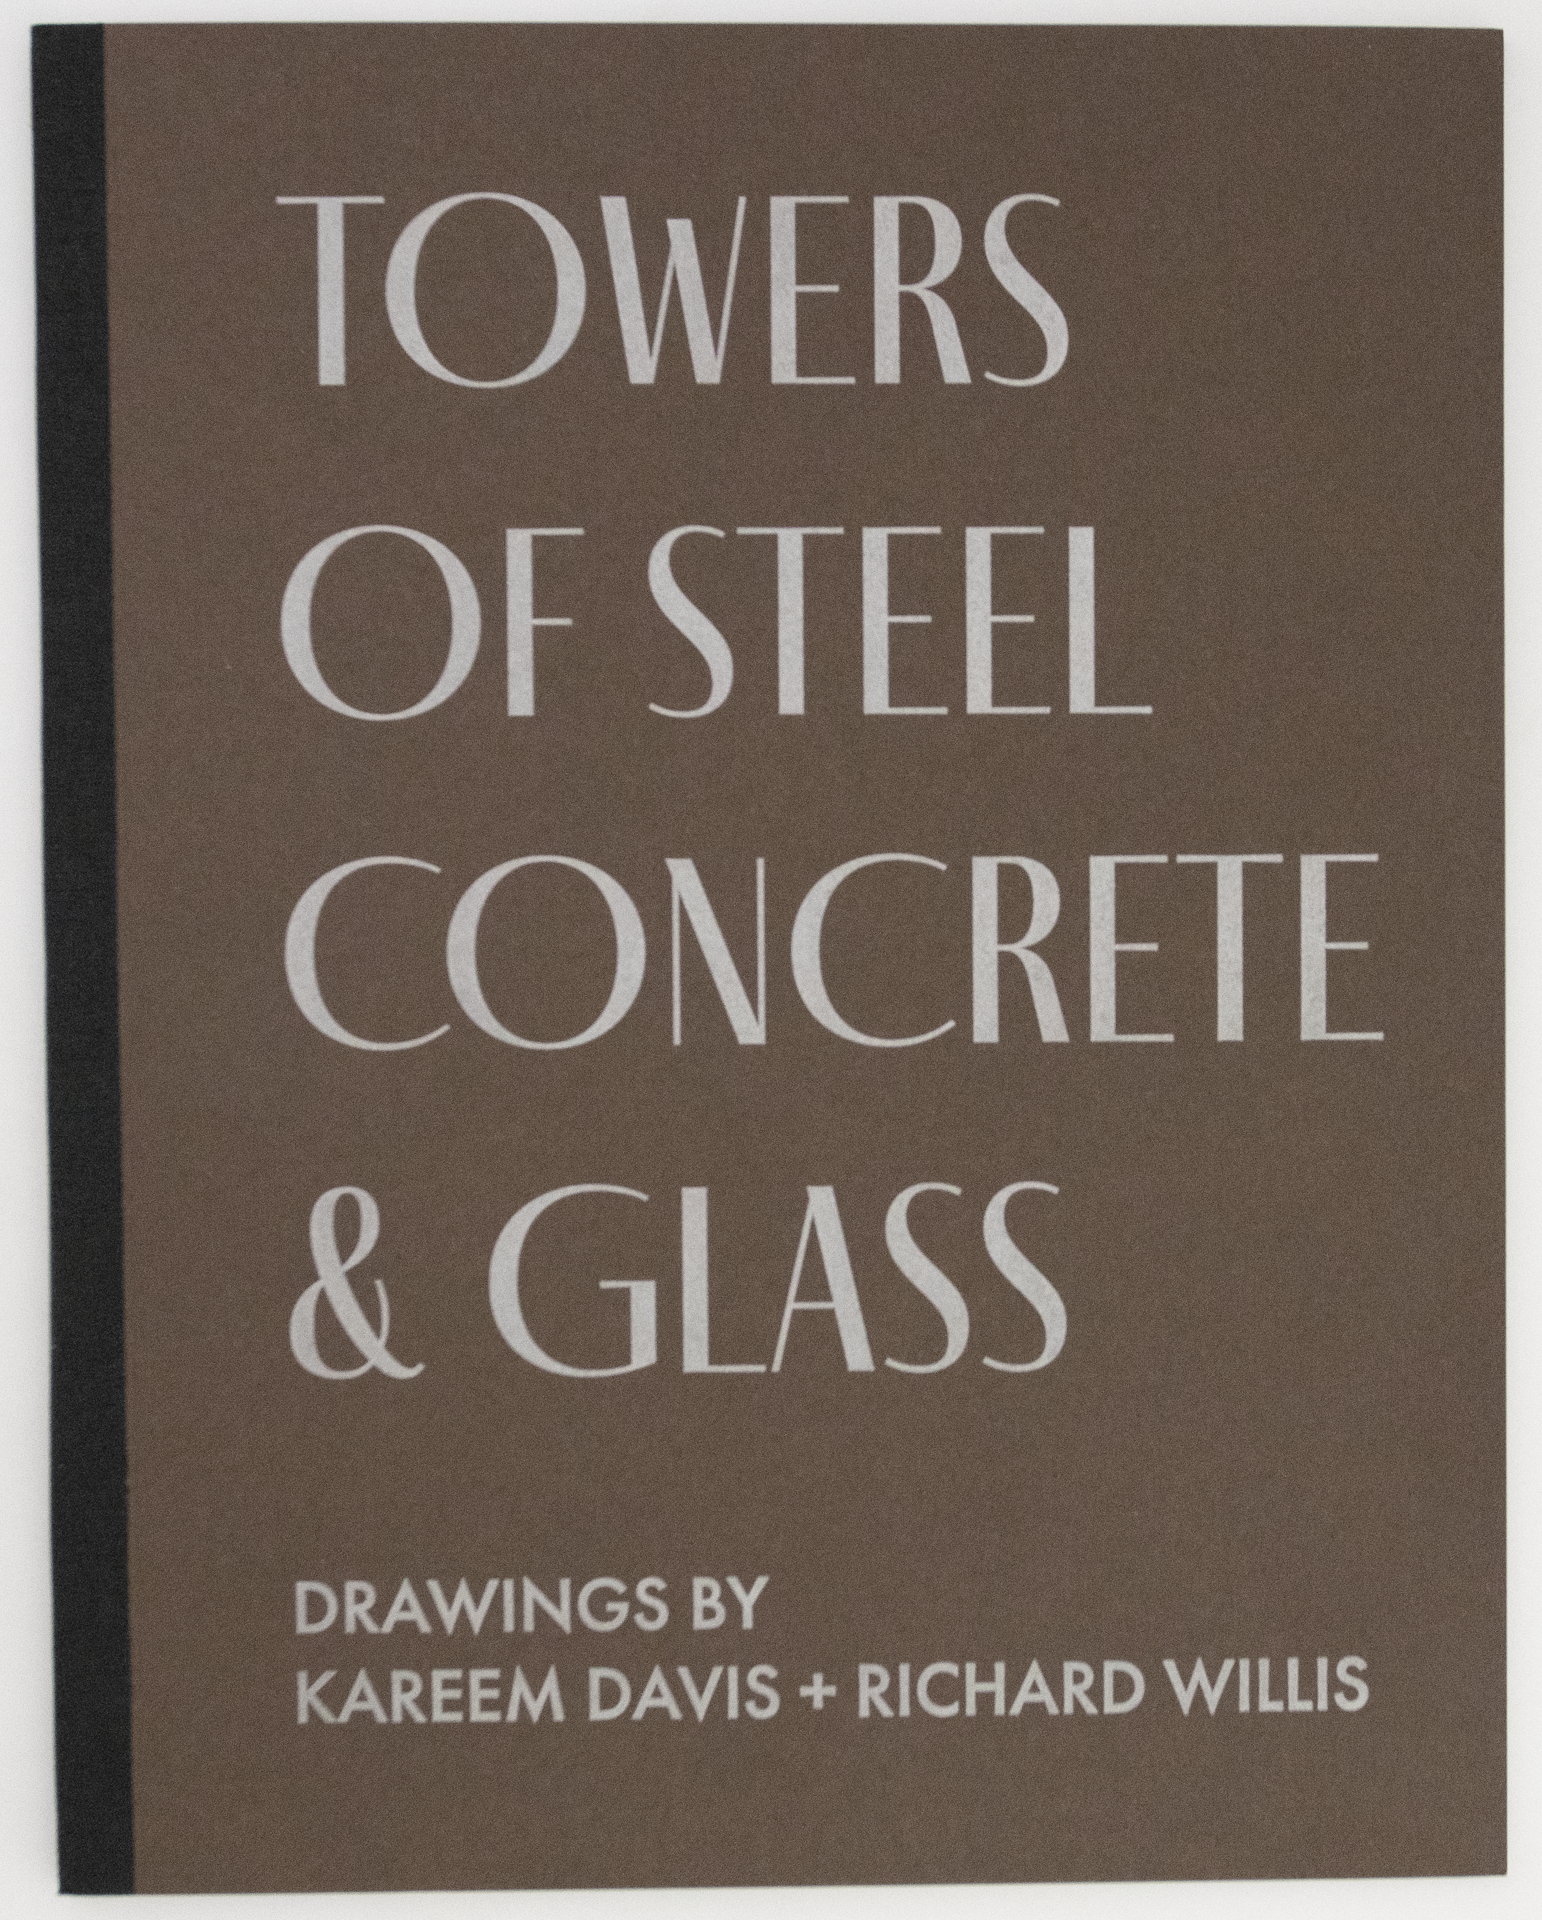 Towers of Steel, Concrete, & Glass